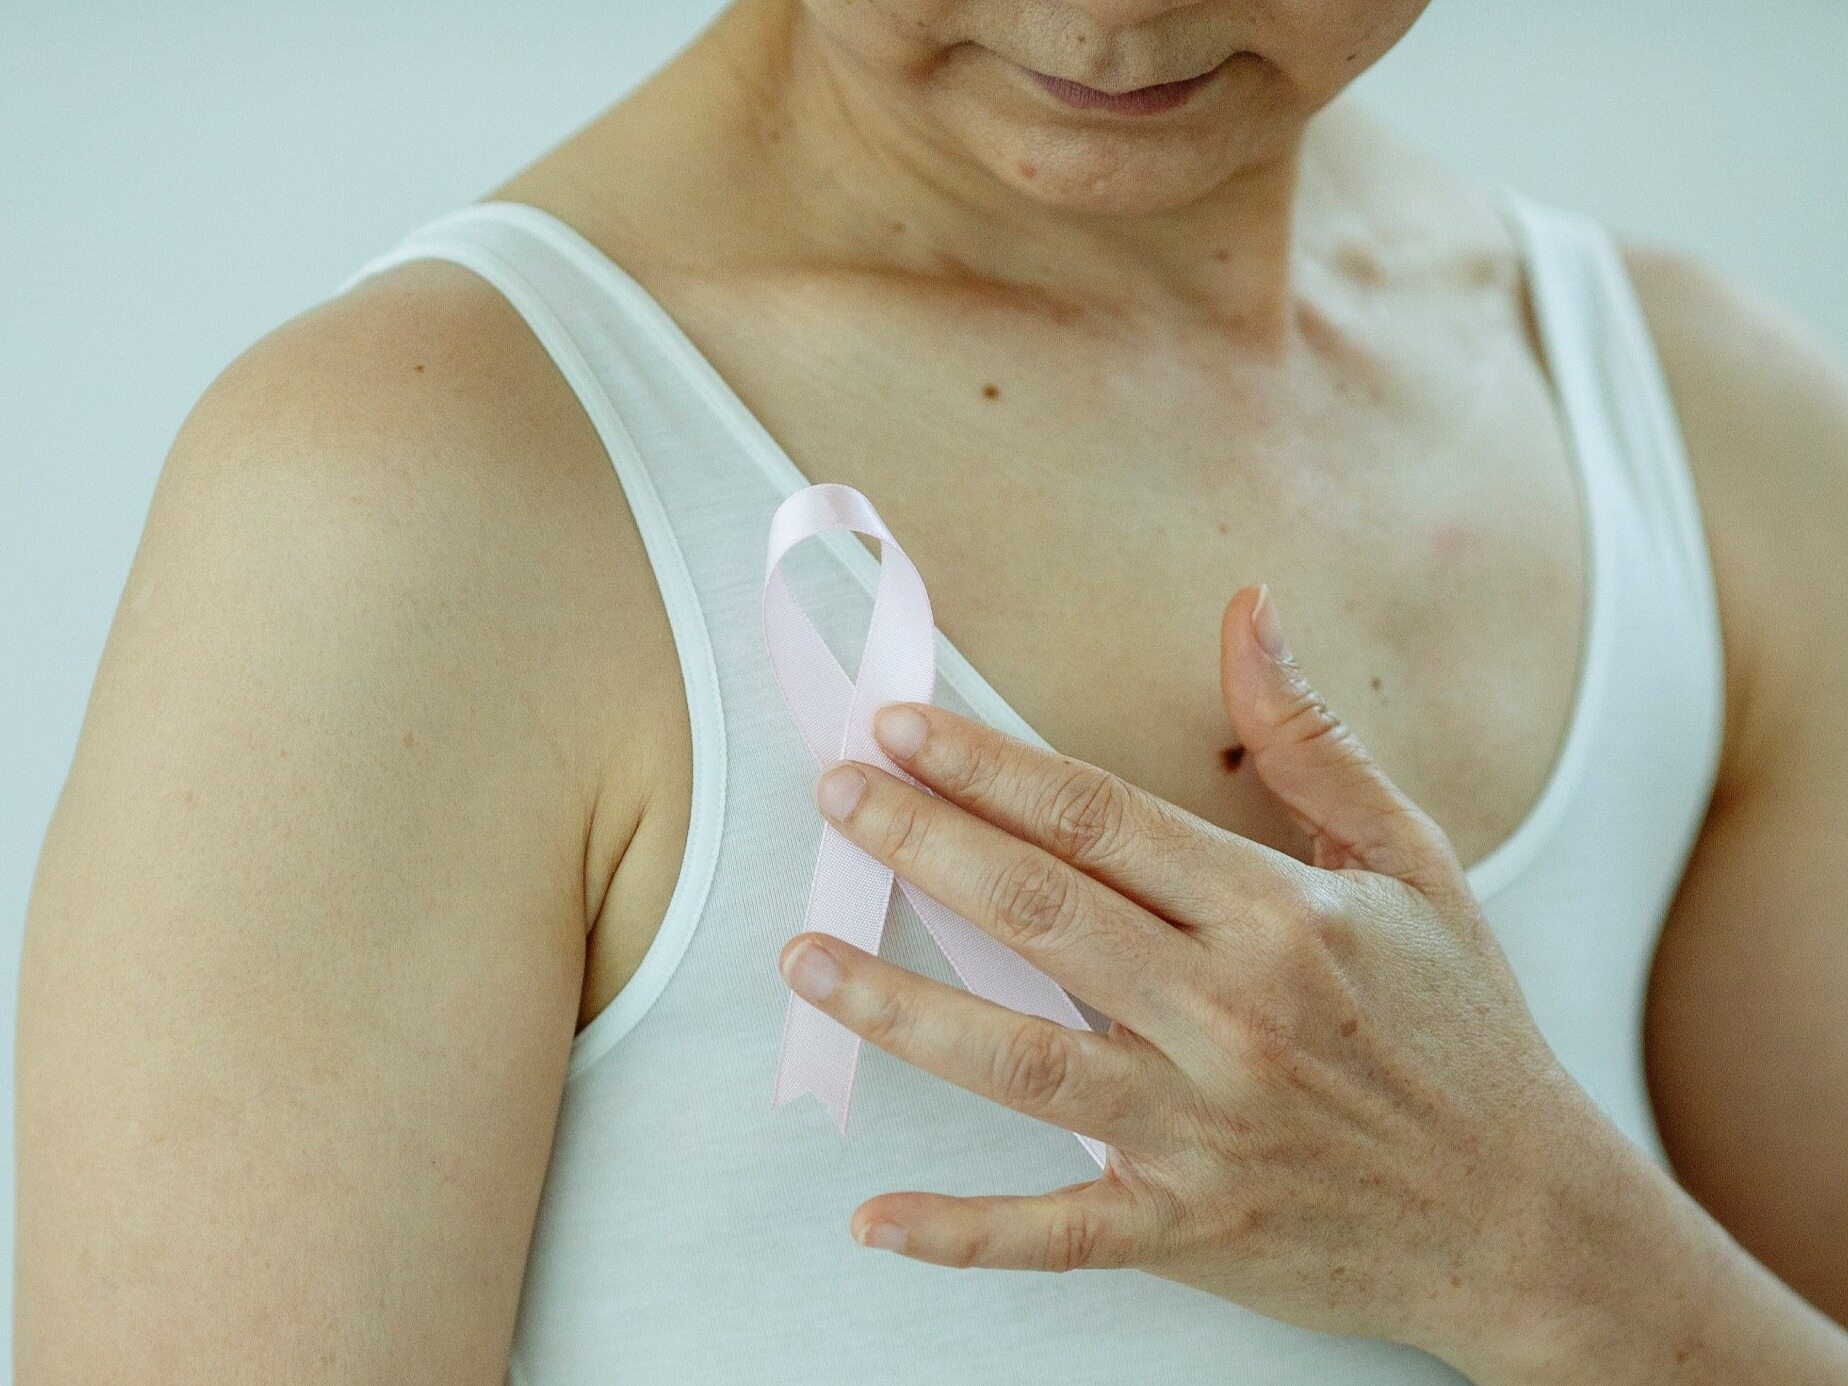 Detect breast cancer without leaving home.  This is a chance for faster diagnosis